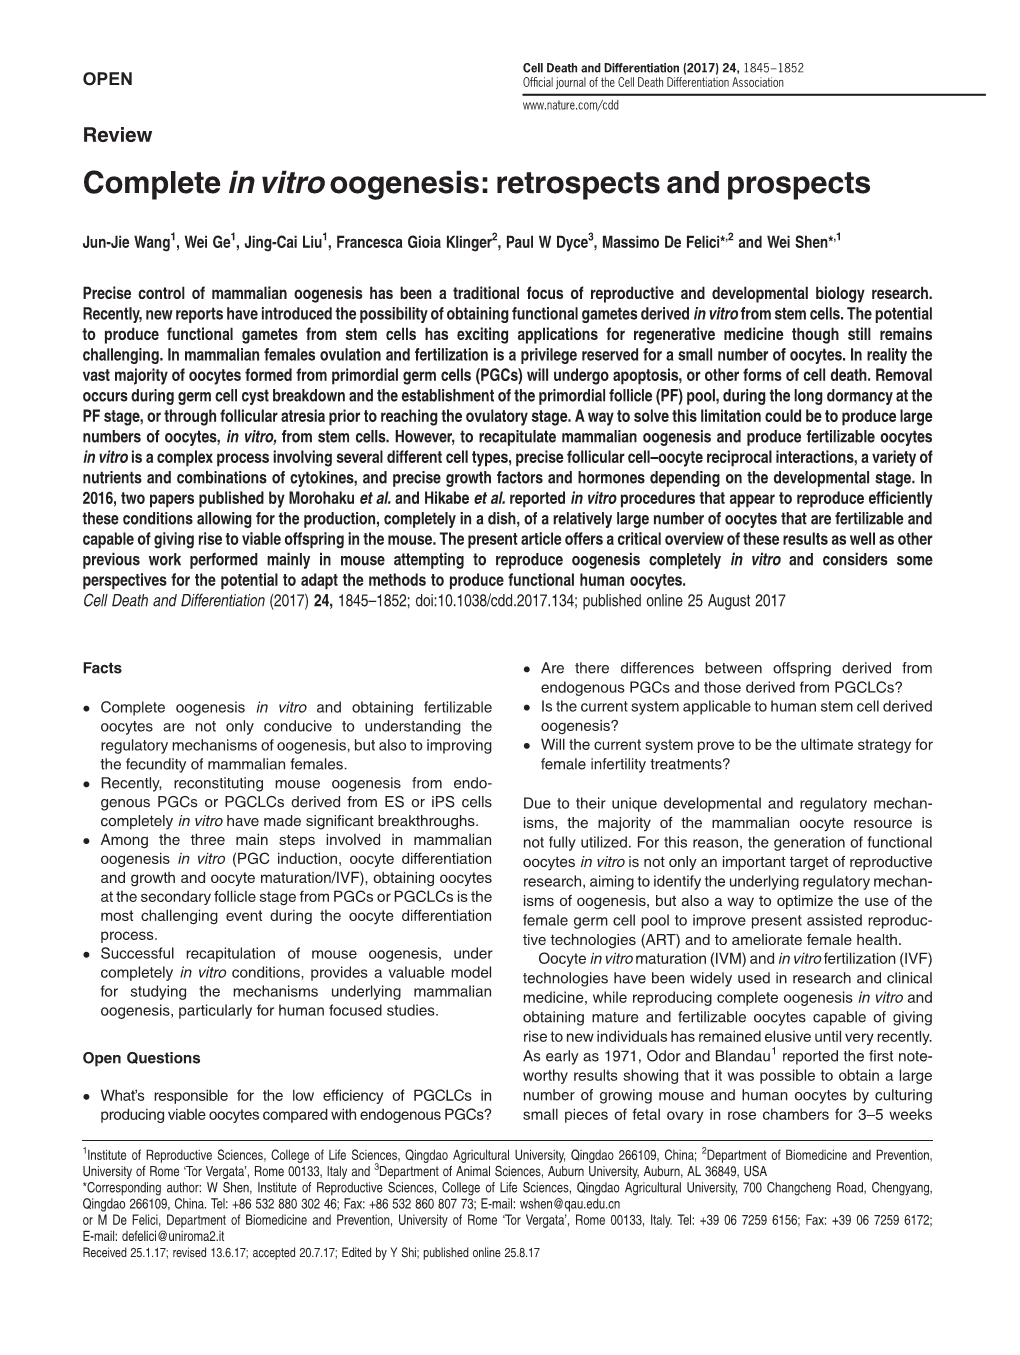 Complete in Vitro Oogenesis: Retrospects and Prospects